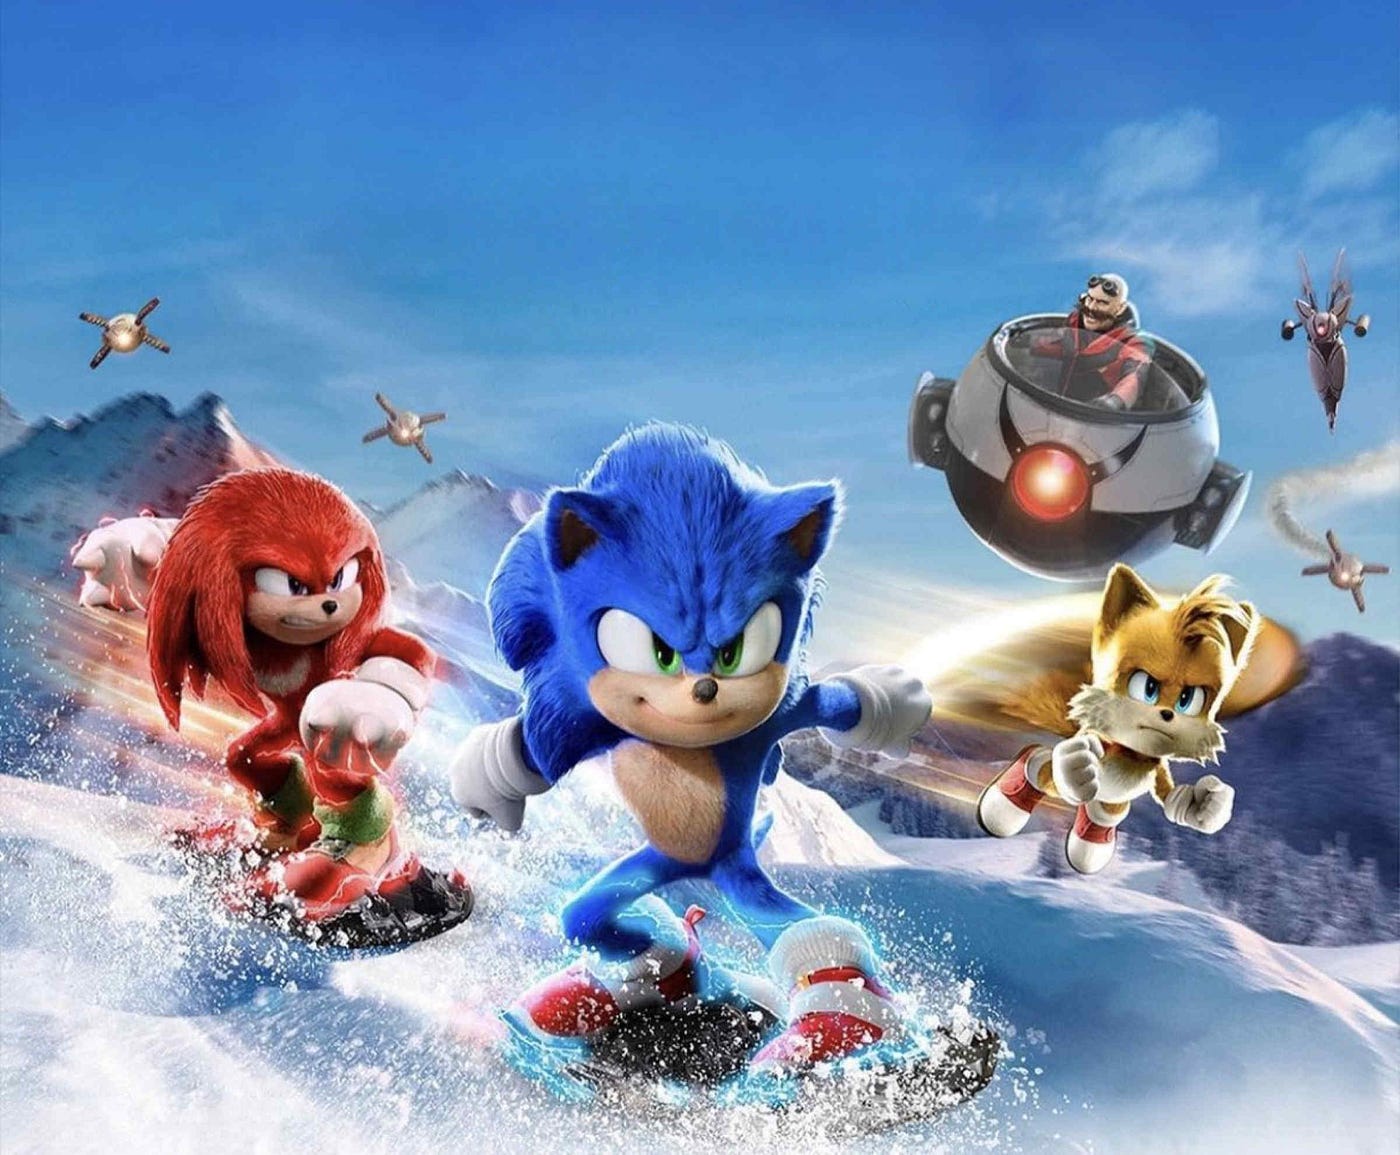 Avatar 3 and Sonic the Hedgehog 3's release date is 20th Dec 2024. Which  blue movie are you going to see first? Weekend Era